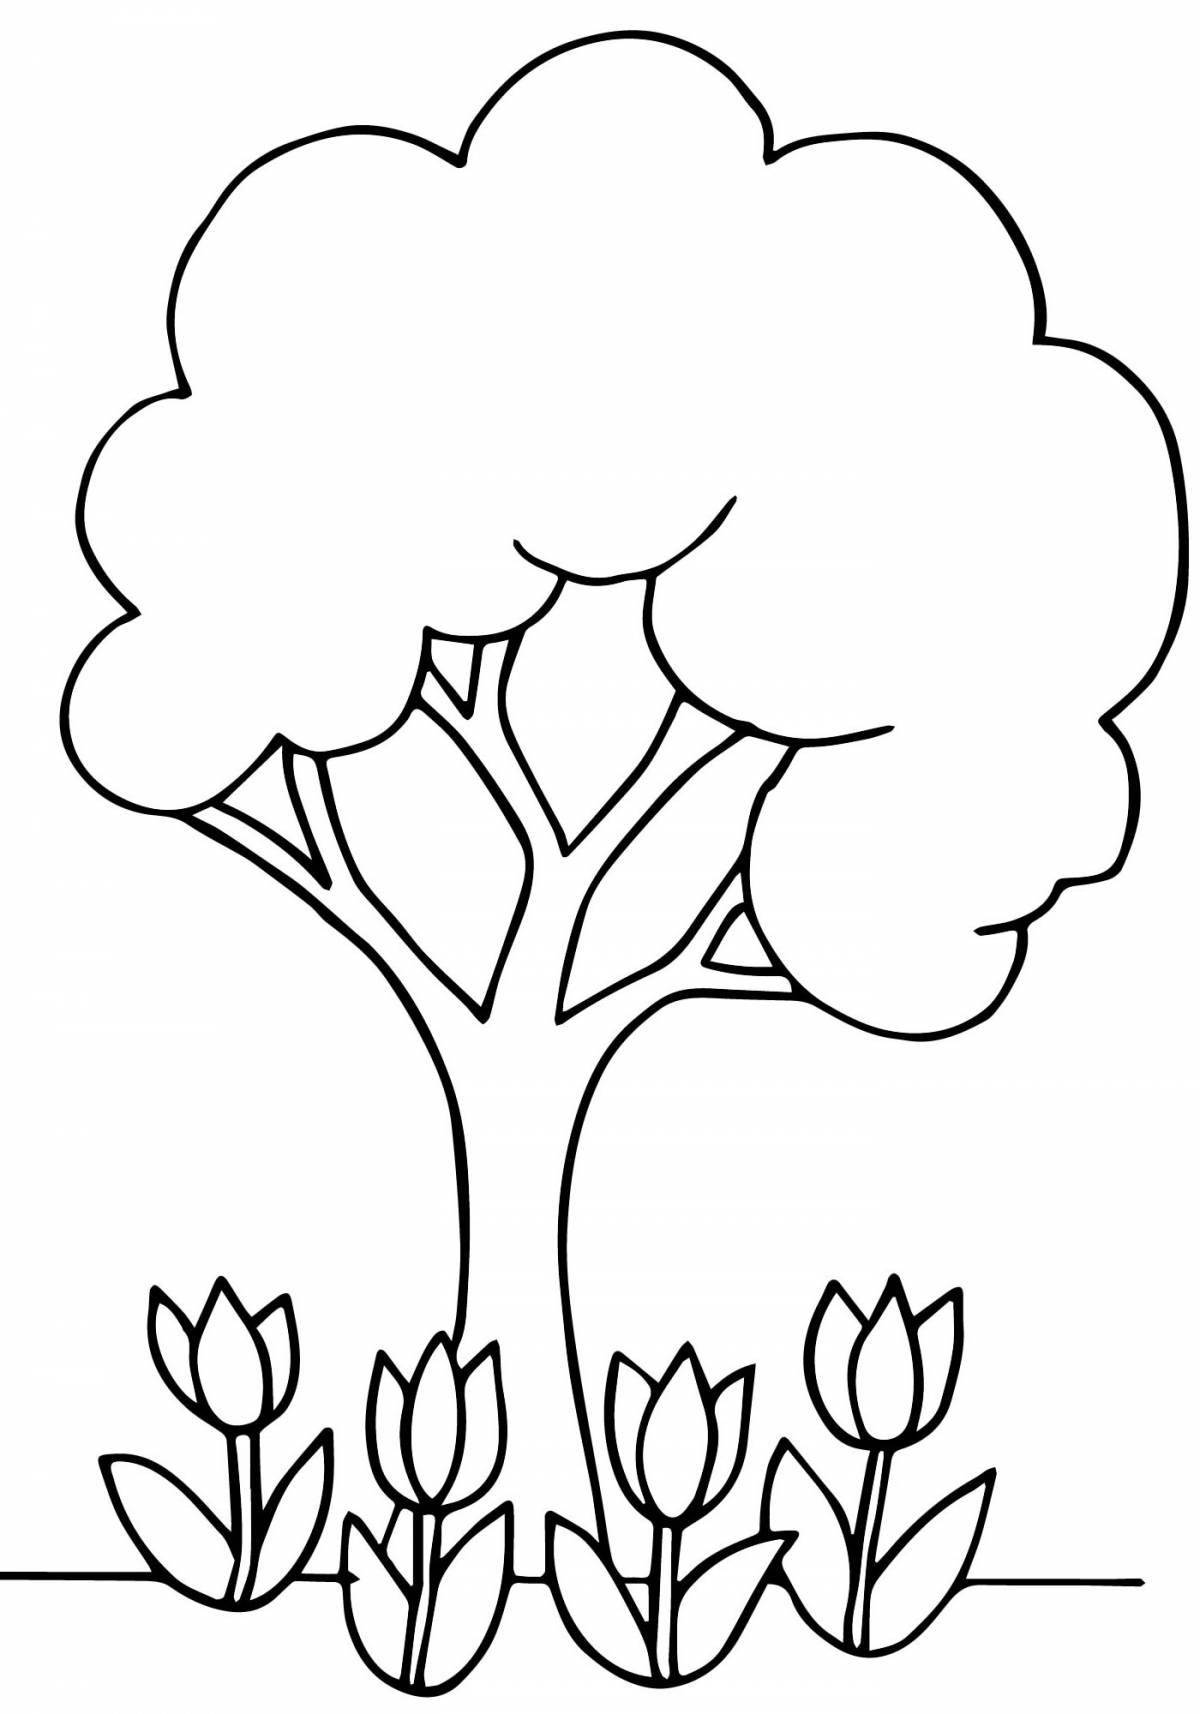 Bold tree coloring page for 6-7 year olds